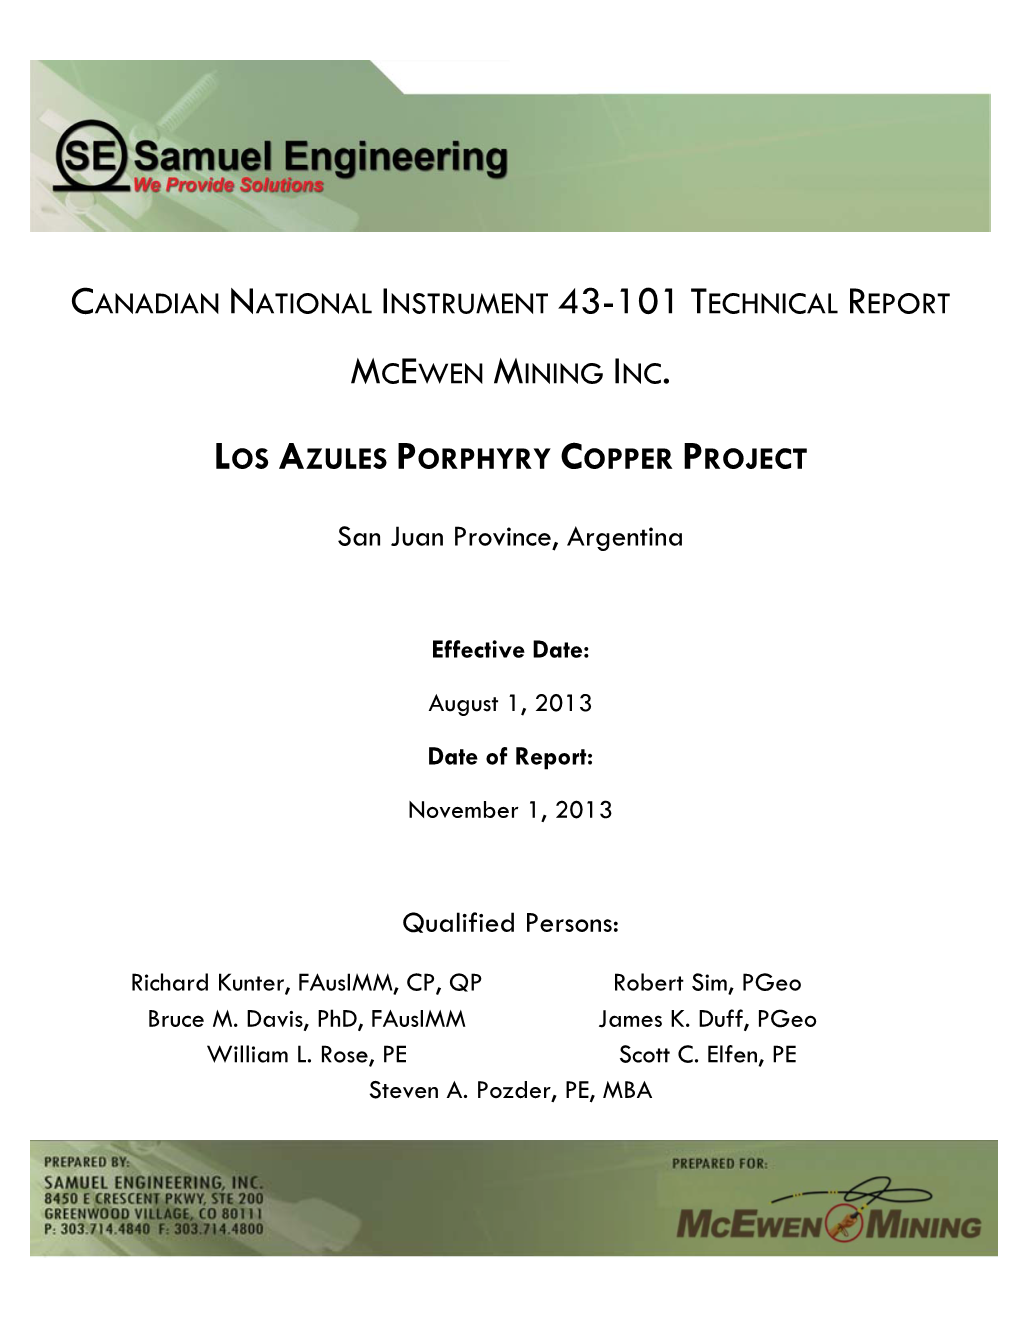 Canadian National Instrument 43-101 Technical Report Mcewen Mining Inc